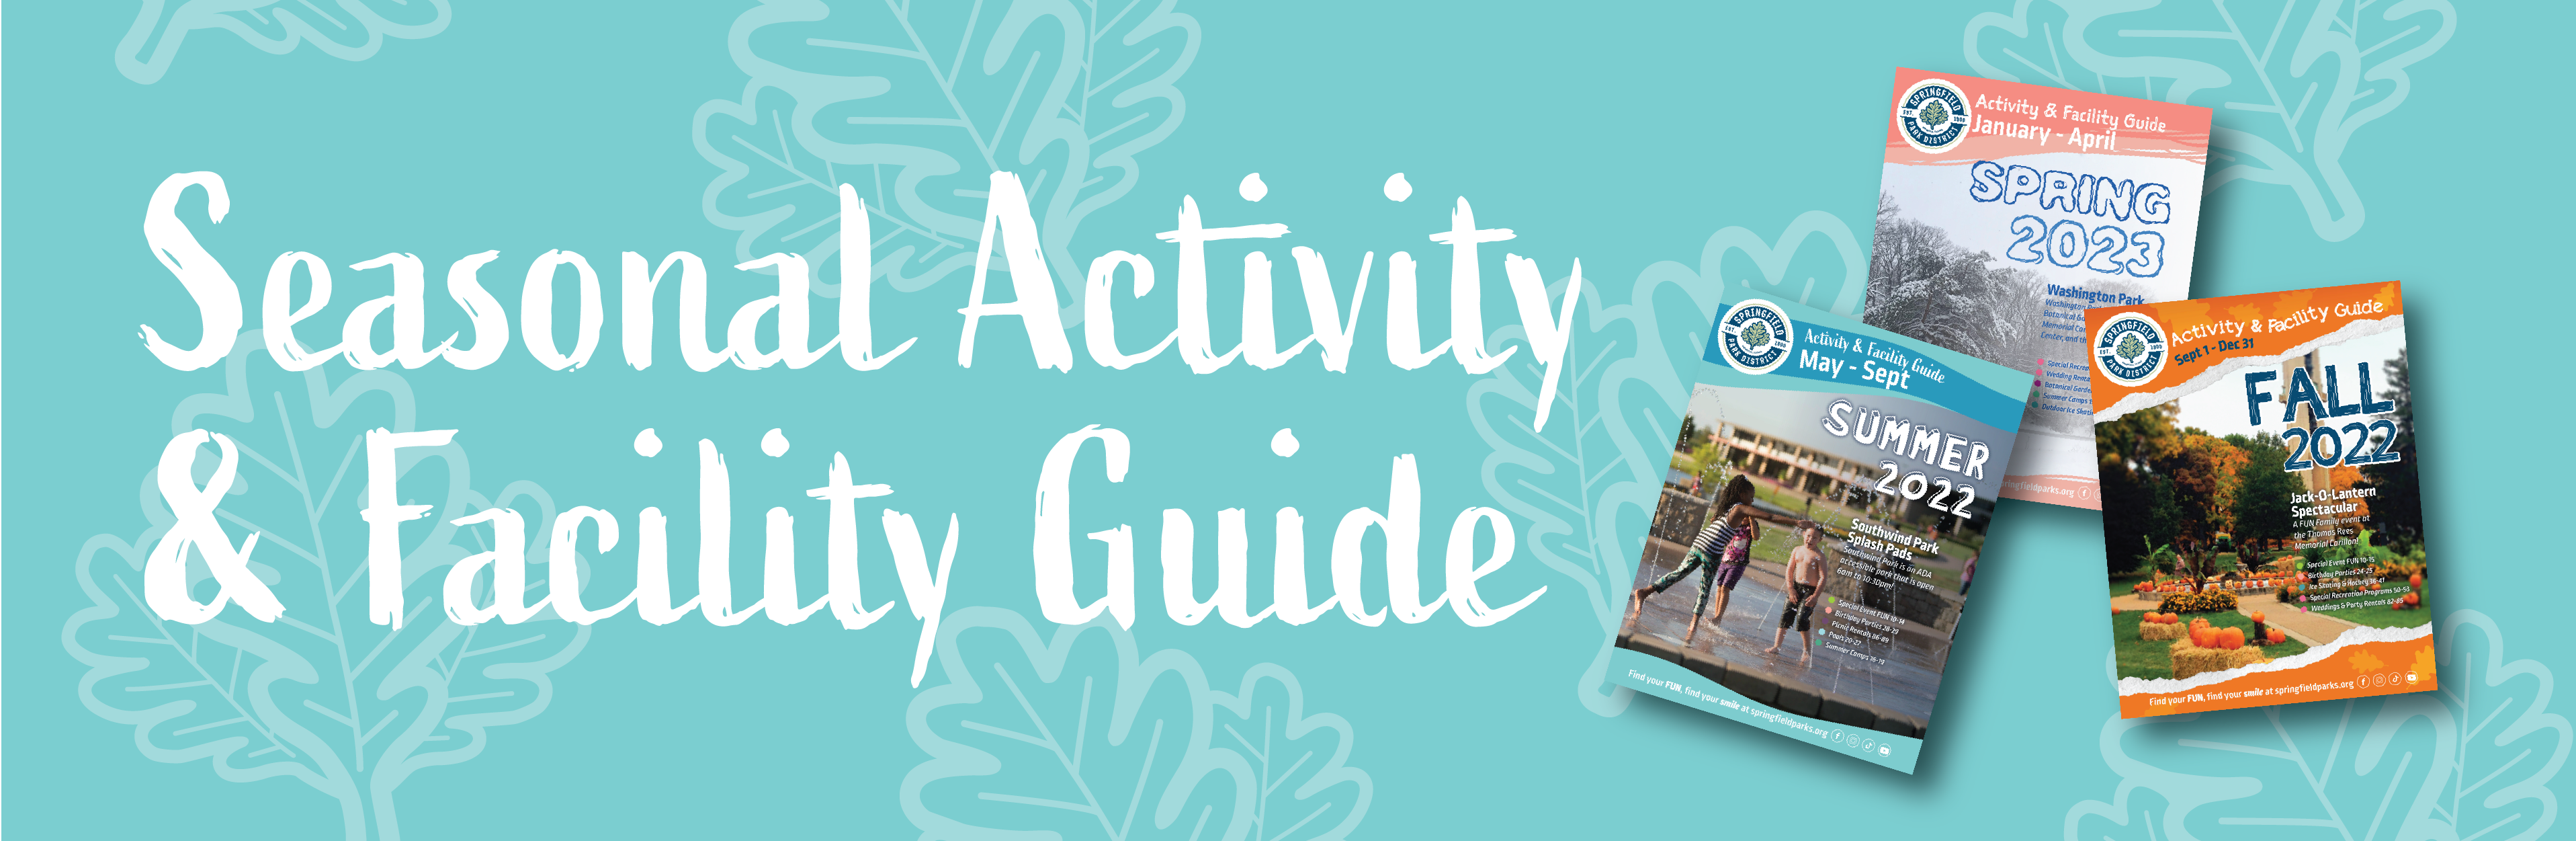 Banner image of park district fall activity guide